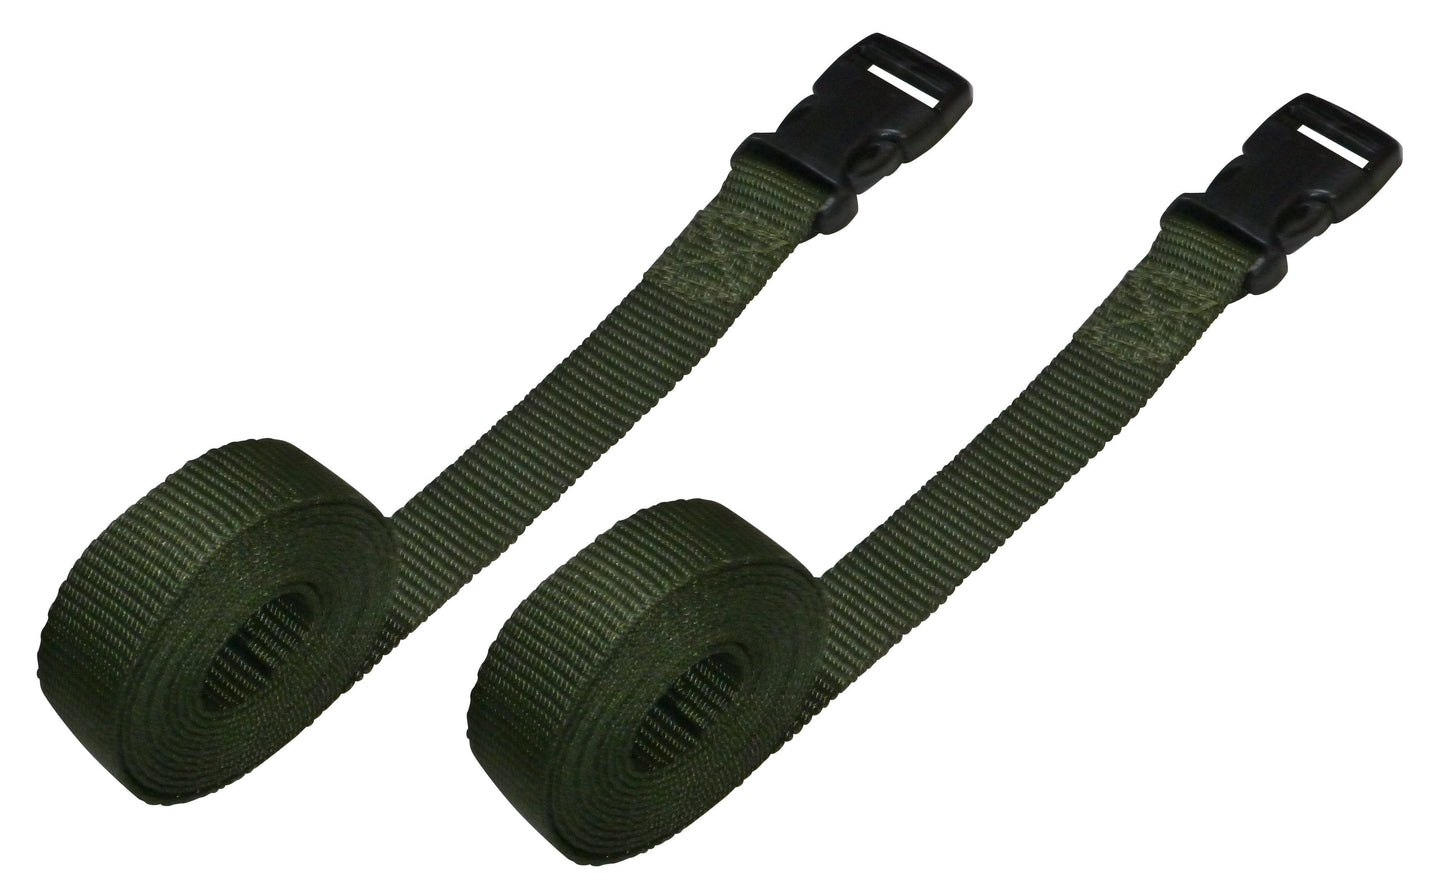 Benristraps 2 Pack Webbing Straps with Clips - Adjustable Luggage Straps in olive green